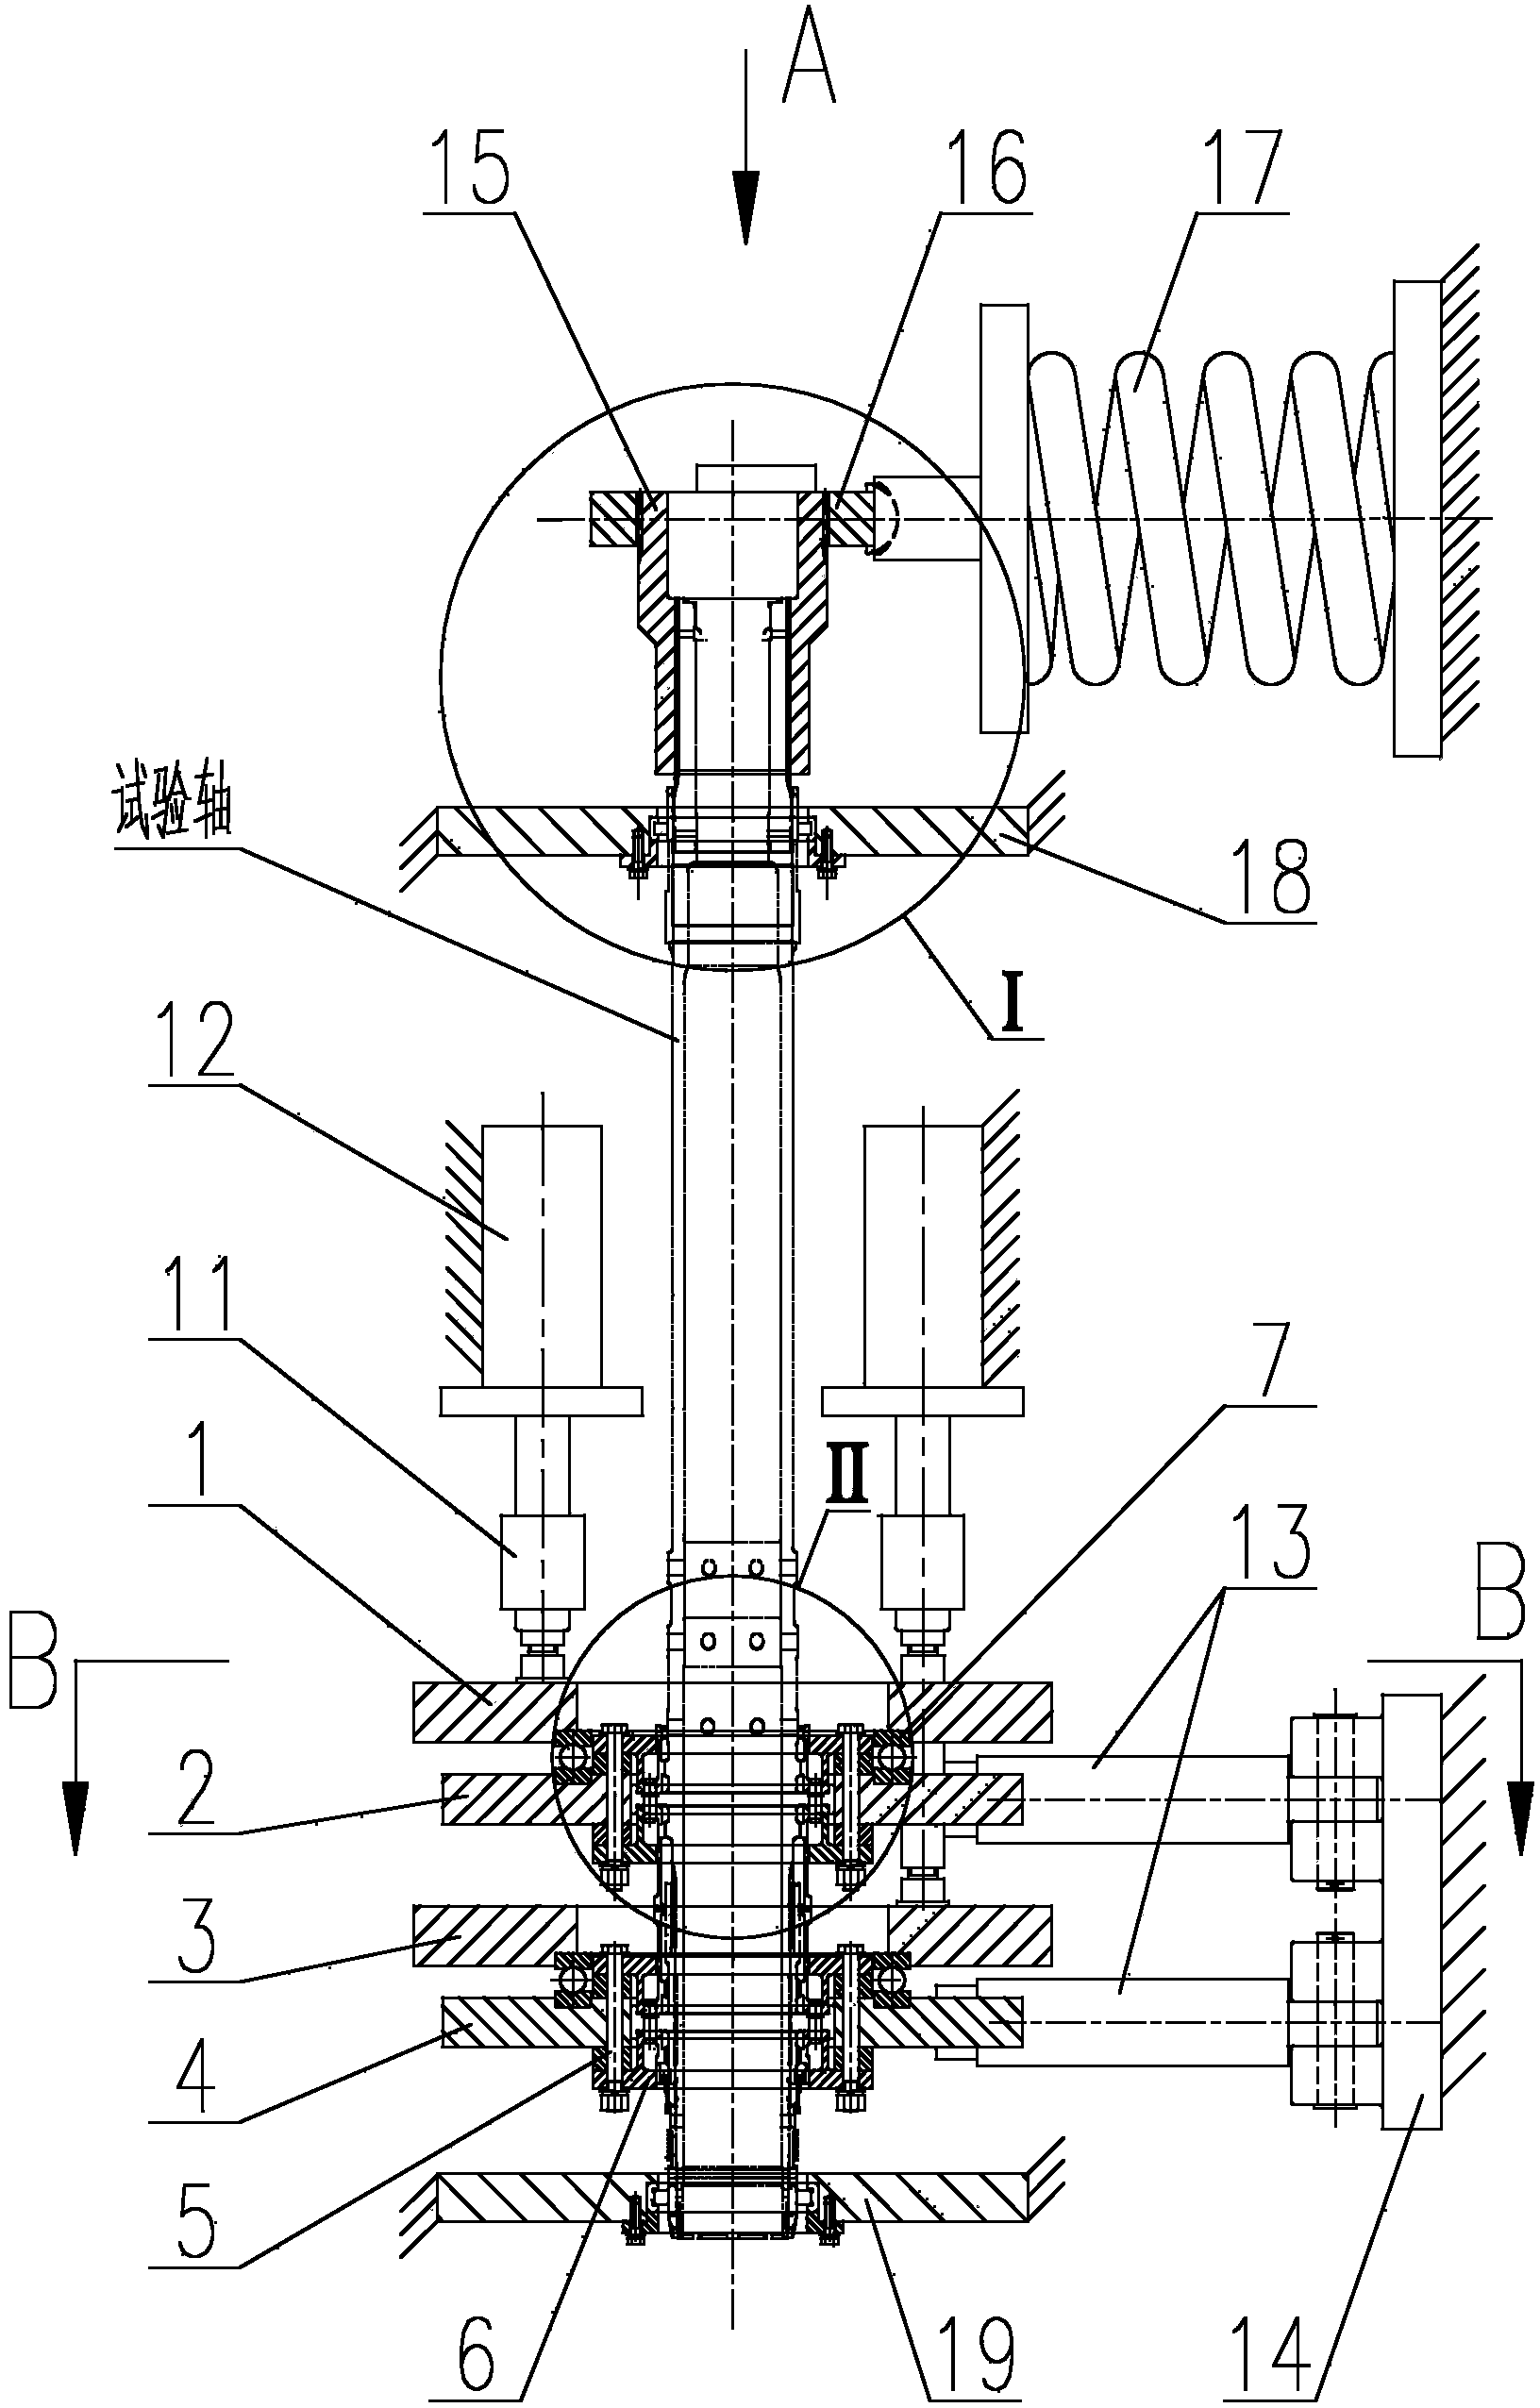 Shaft testing device capable of exerting two-stage combined tension-torsion loading simultaneously